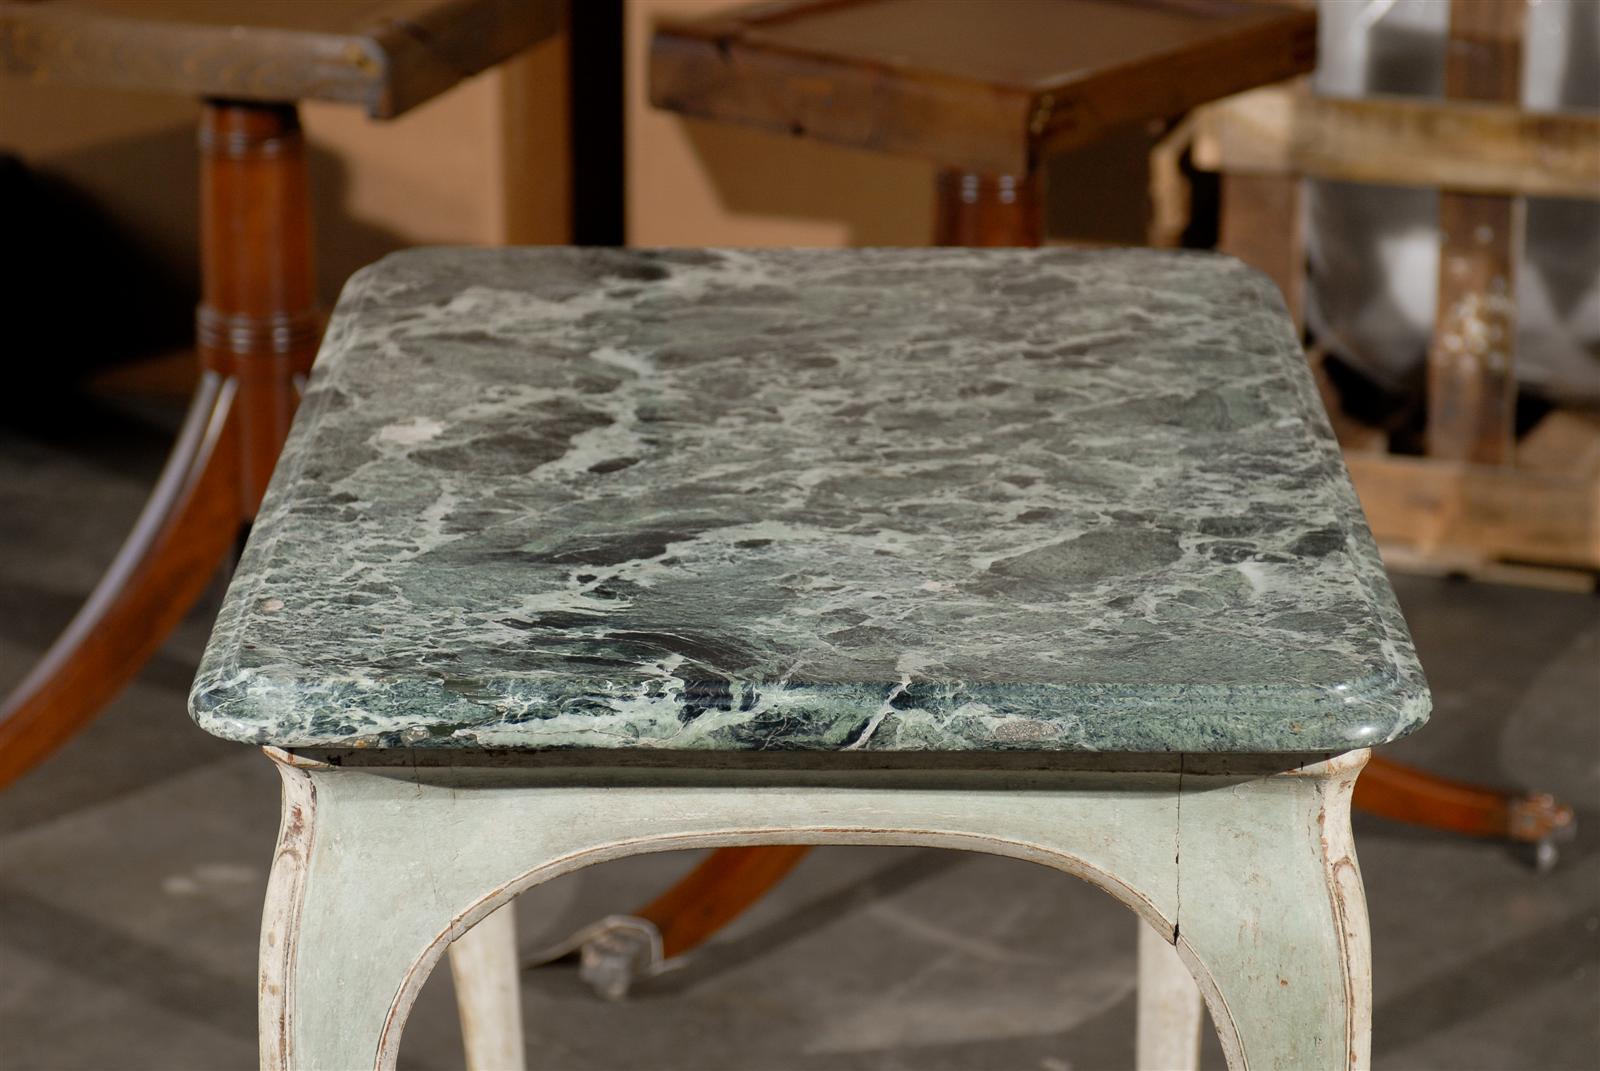 18th-19th century painted green French Louis style table with green marble top.